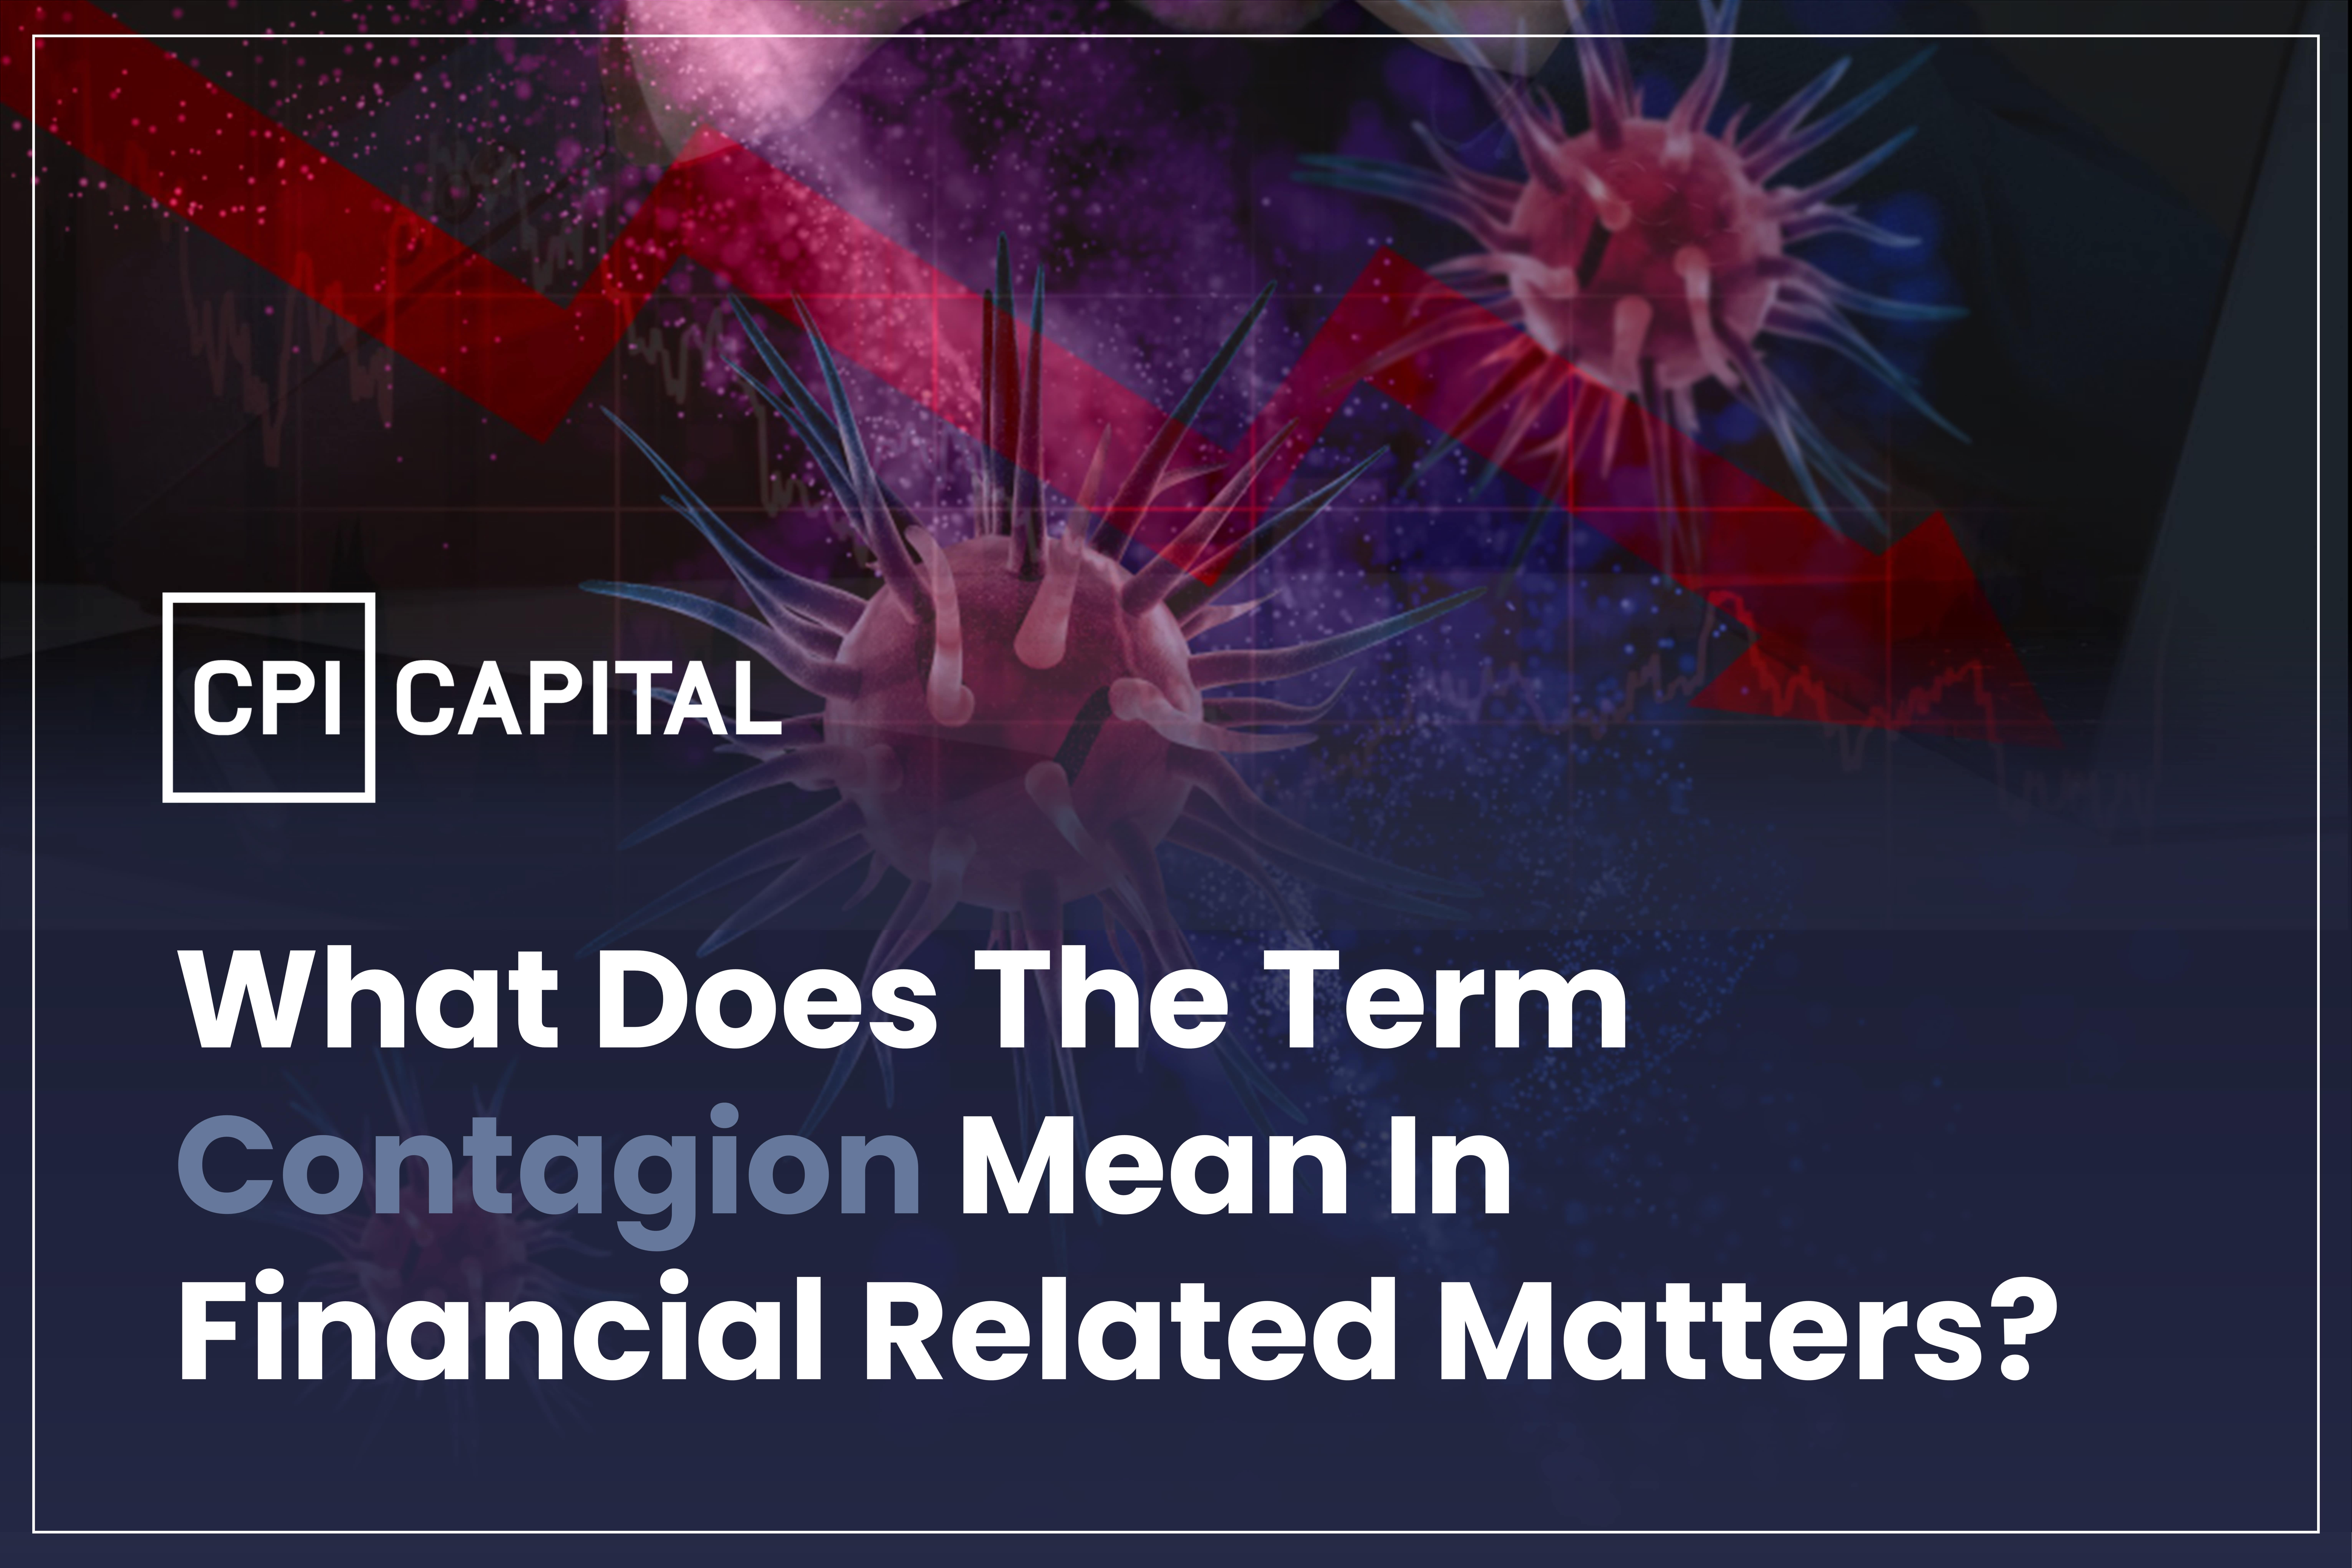 What Does The Term Contagion Mean In Financial Related Matters?